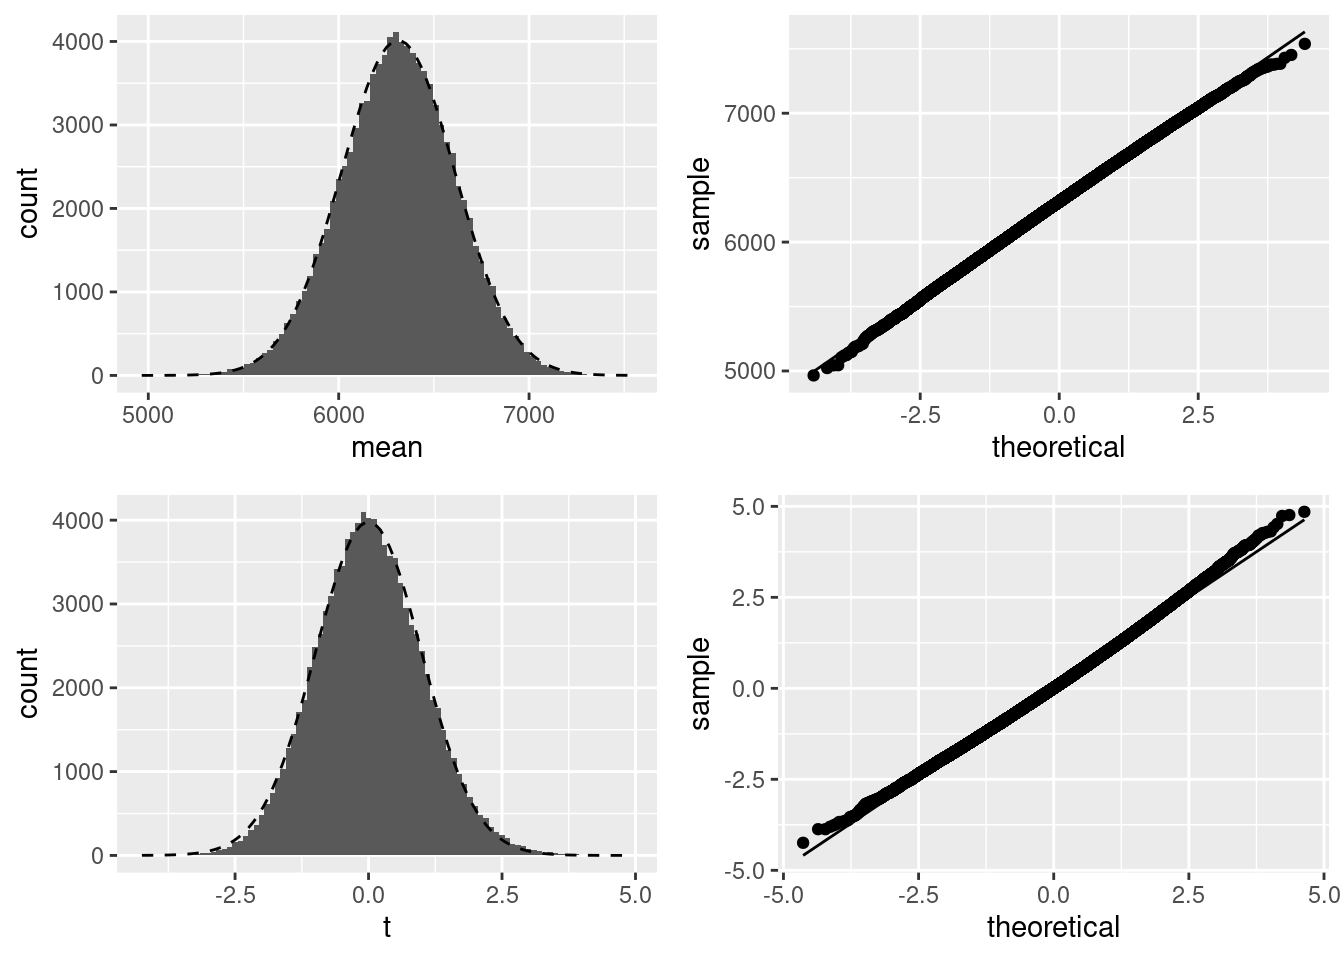 Boostrapped sample means and $t$ statistics, using 100,000 bootstrap samples from the empirical distribution. For both the sample mean and $t$ statistic, we show a histogram with the assumed theoretical distribution overlaid, and a Q-Q plot.